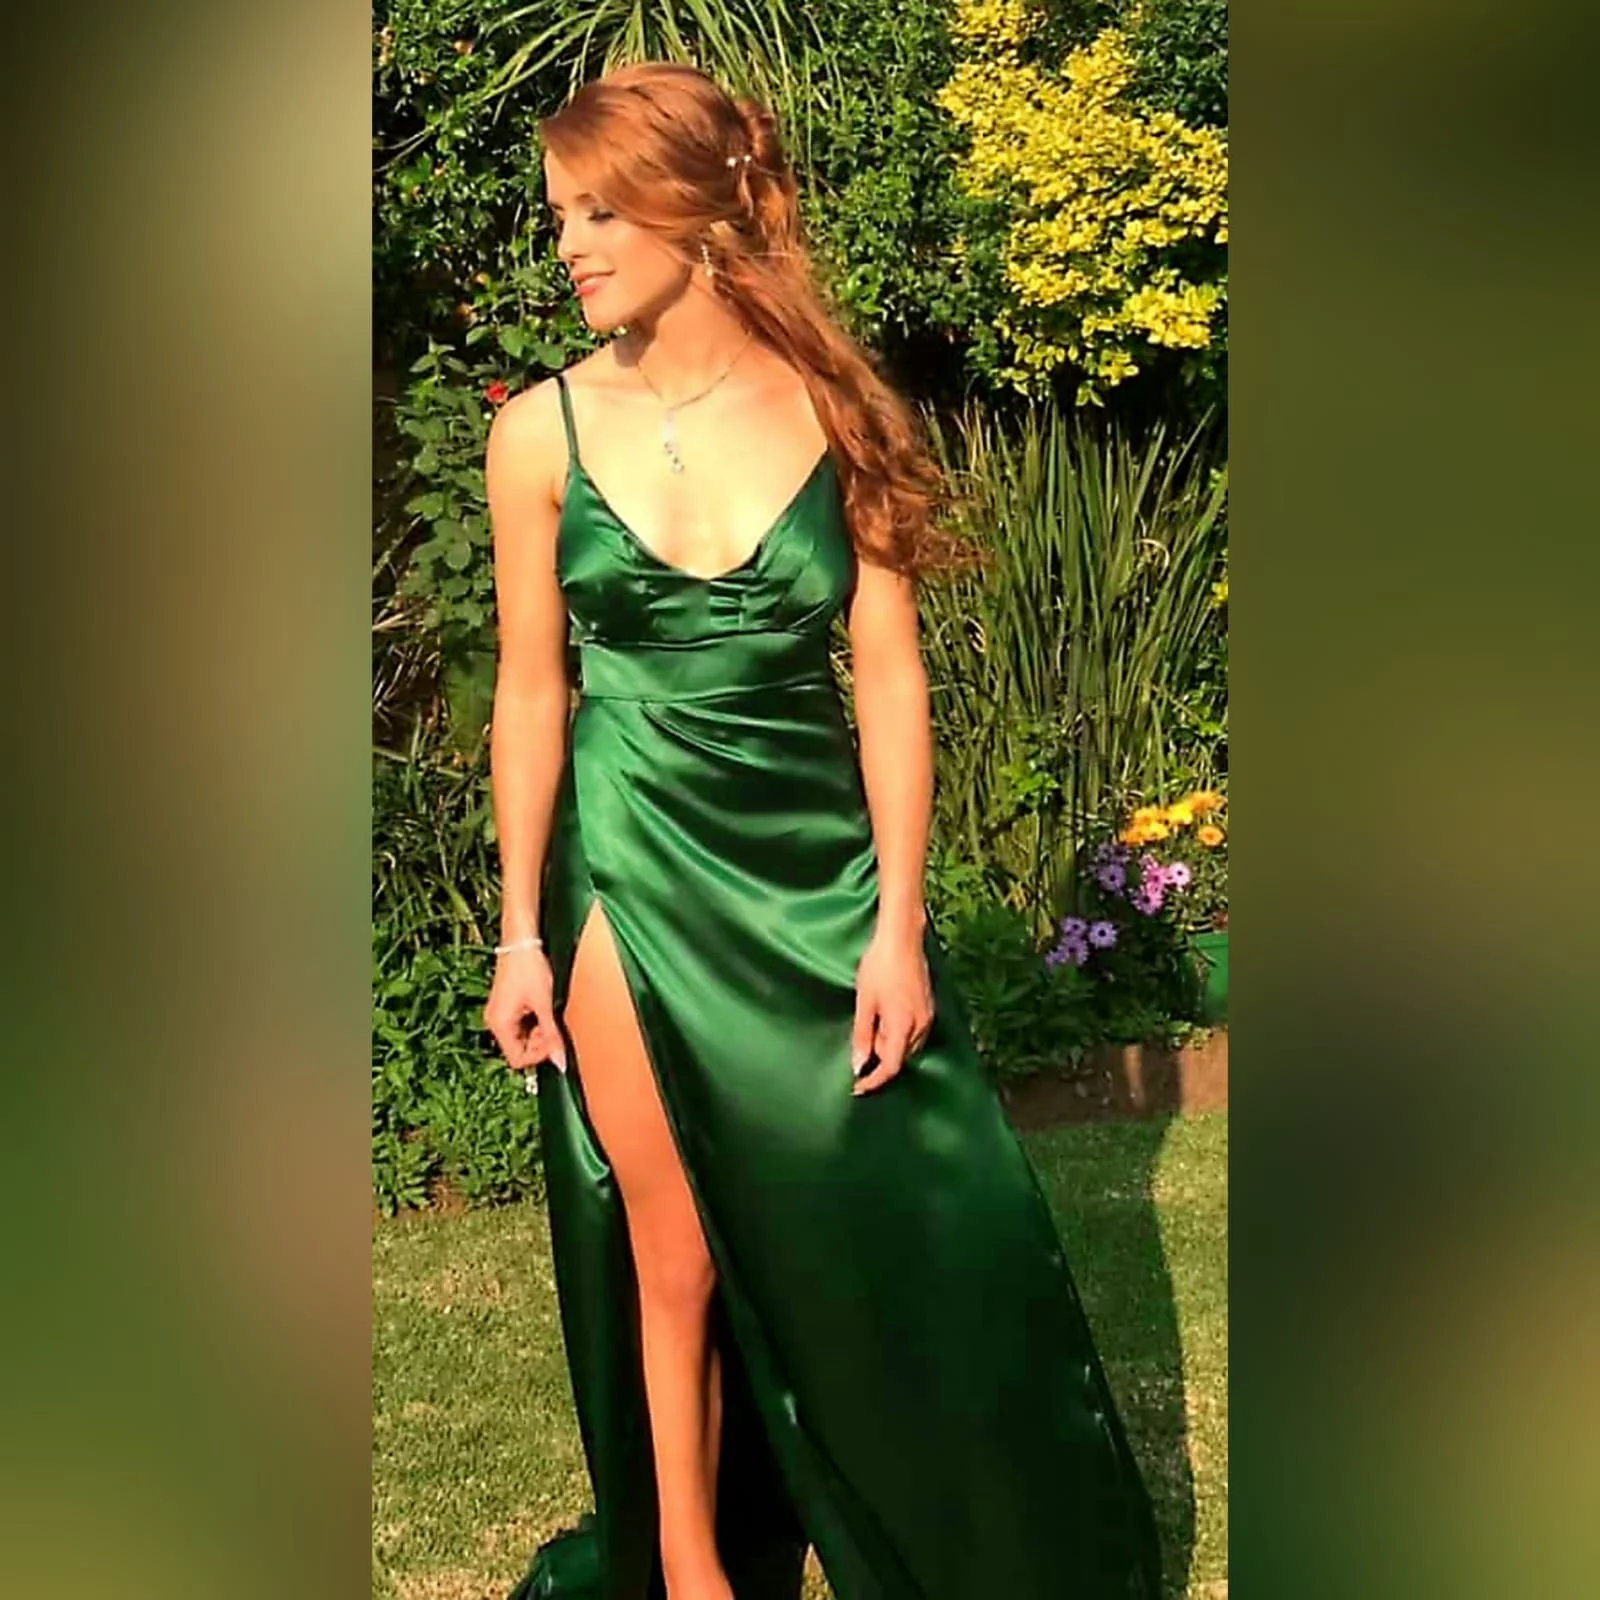 Emerald green long satin matric farewell dress 1 emerald green long satin matric farewell dress. With a high crossed slit and a train.